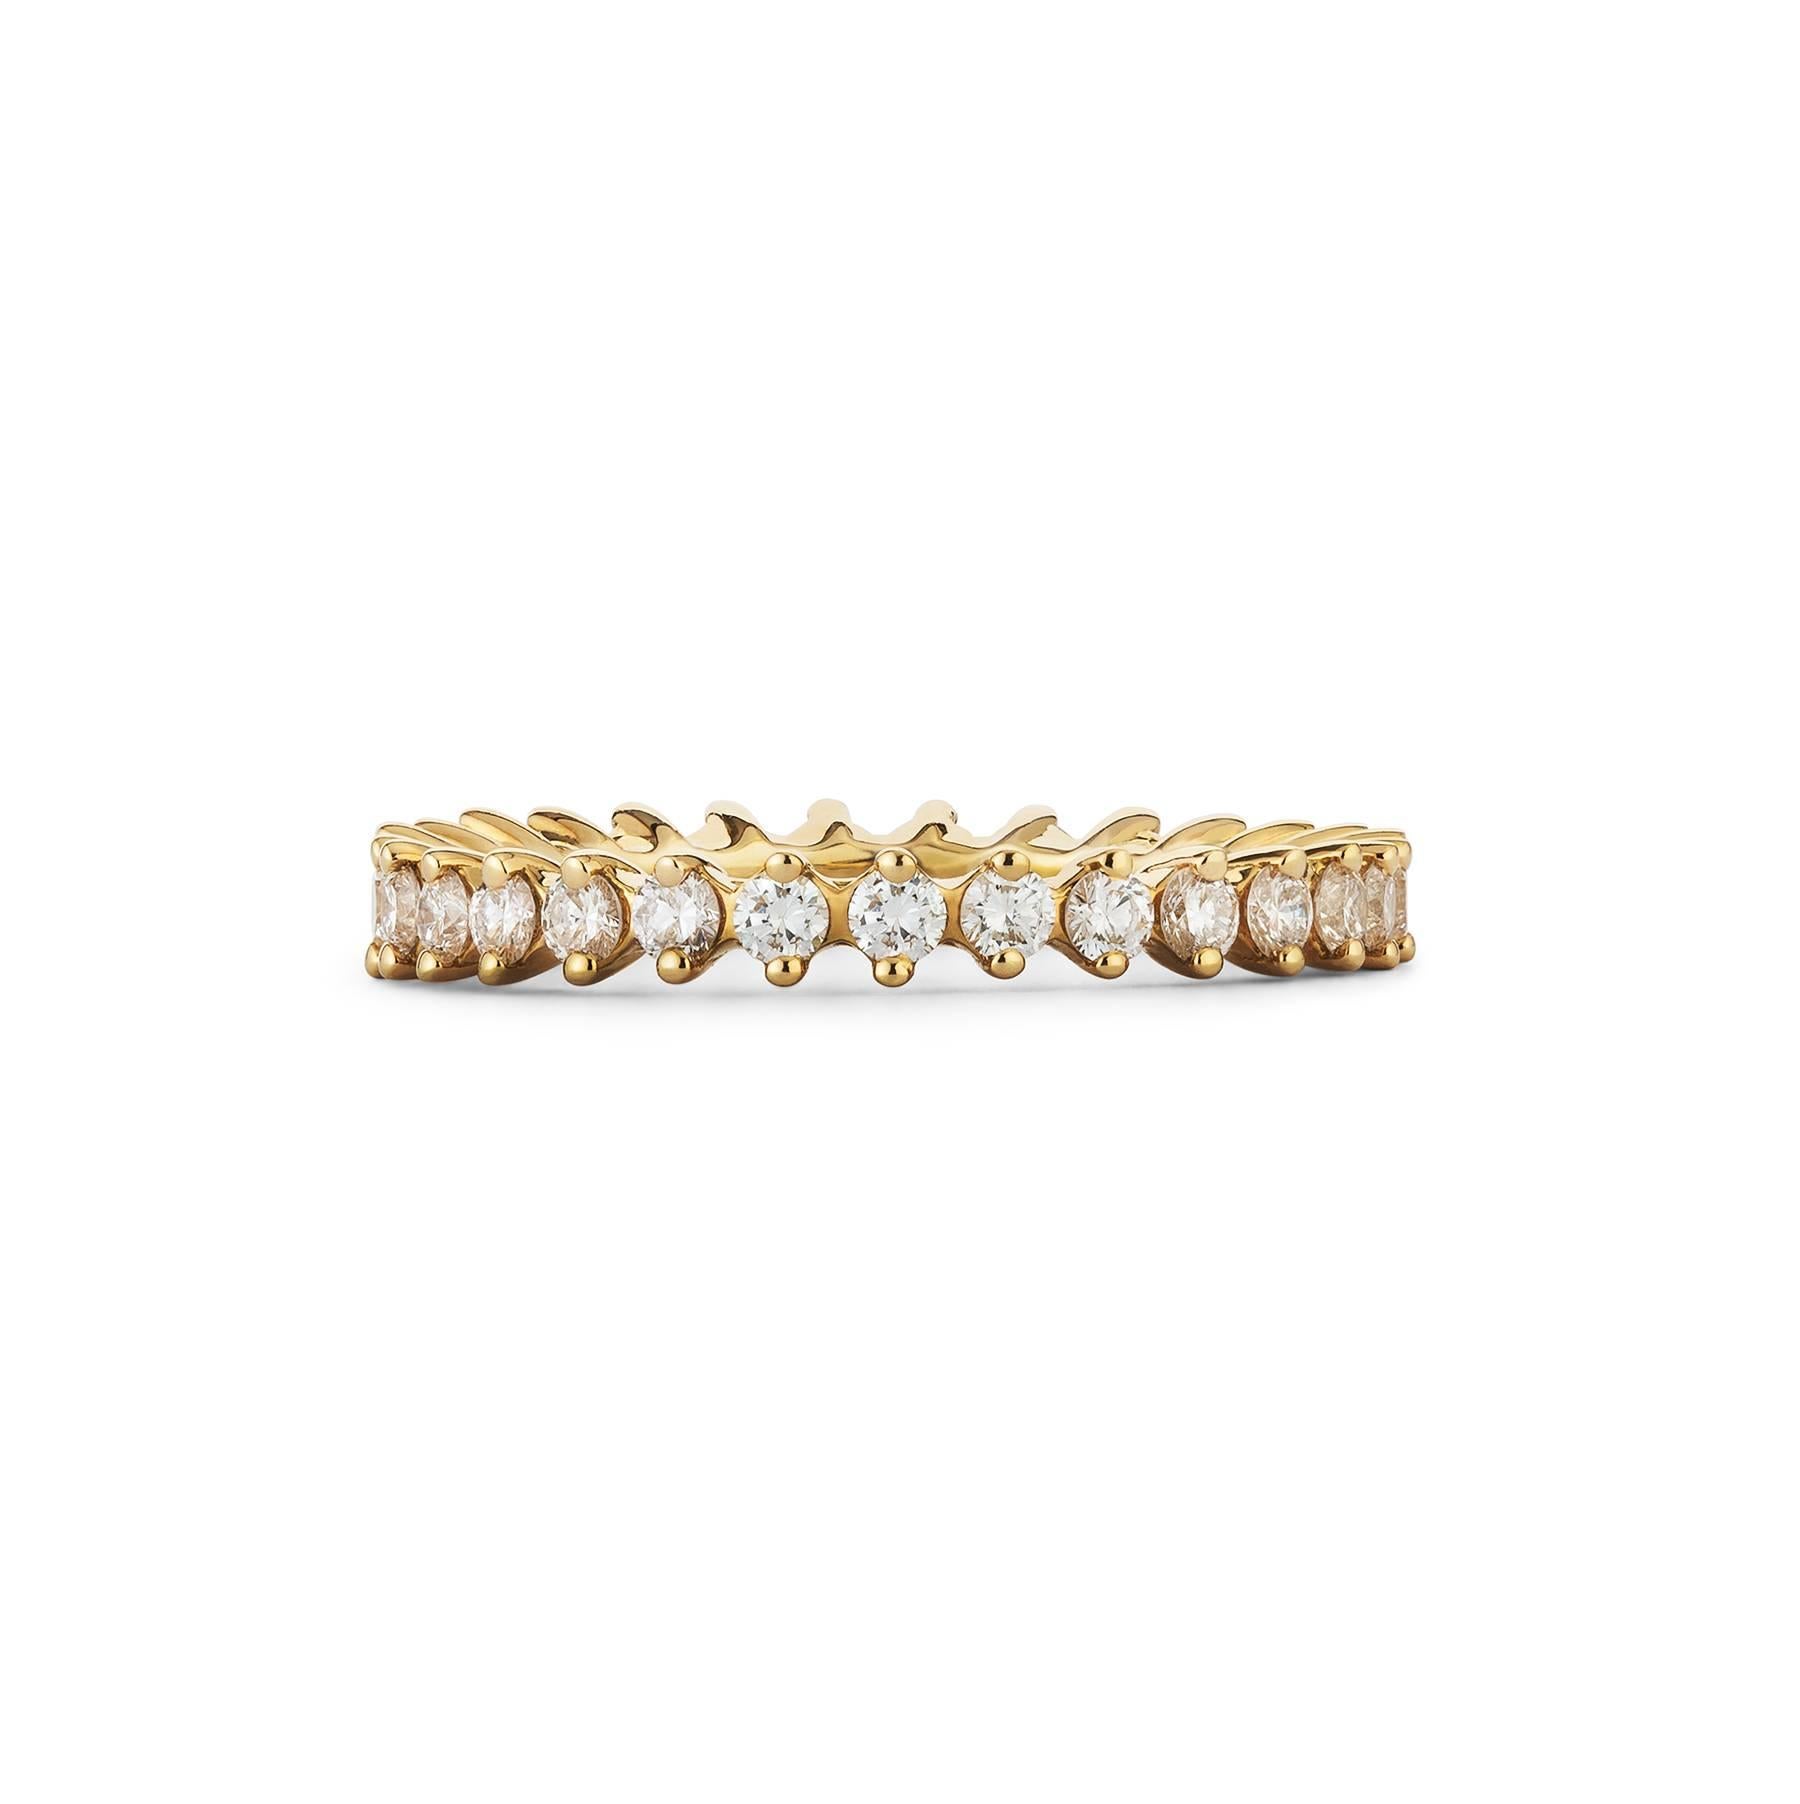 These diamond stacking rings use two claws for each diamond setting so that when they are worn together, they stack perfectly next to one another to look like one single ring.

Set in 18K white, yellow and rose gold, each ring has a total diamond